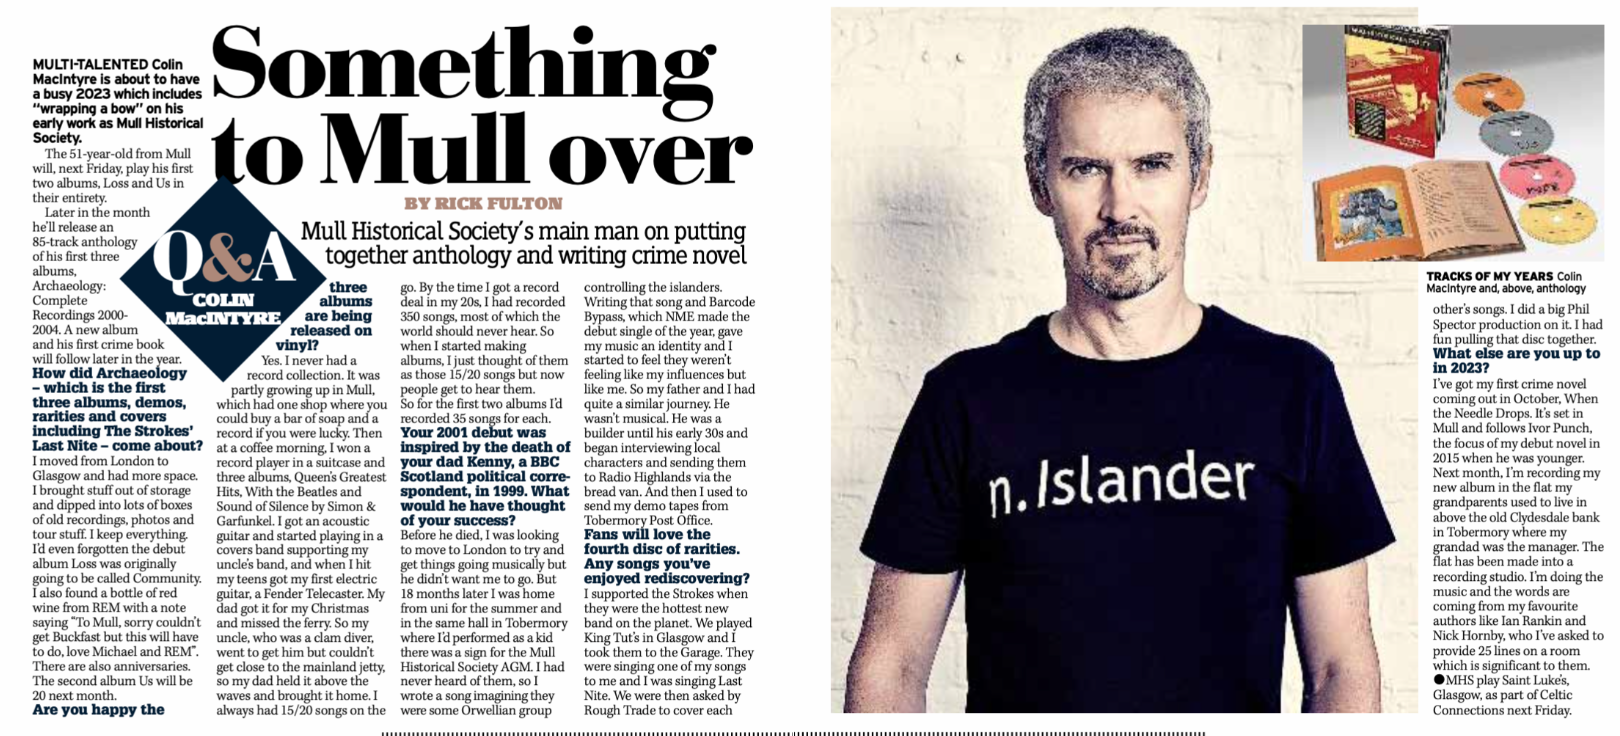 Daily Record: ‘Something to Mull Over…’ Q&A with Colin on ‘Archaeology’, new MHS album and new Crime novel